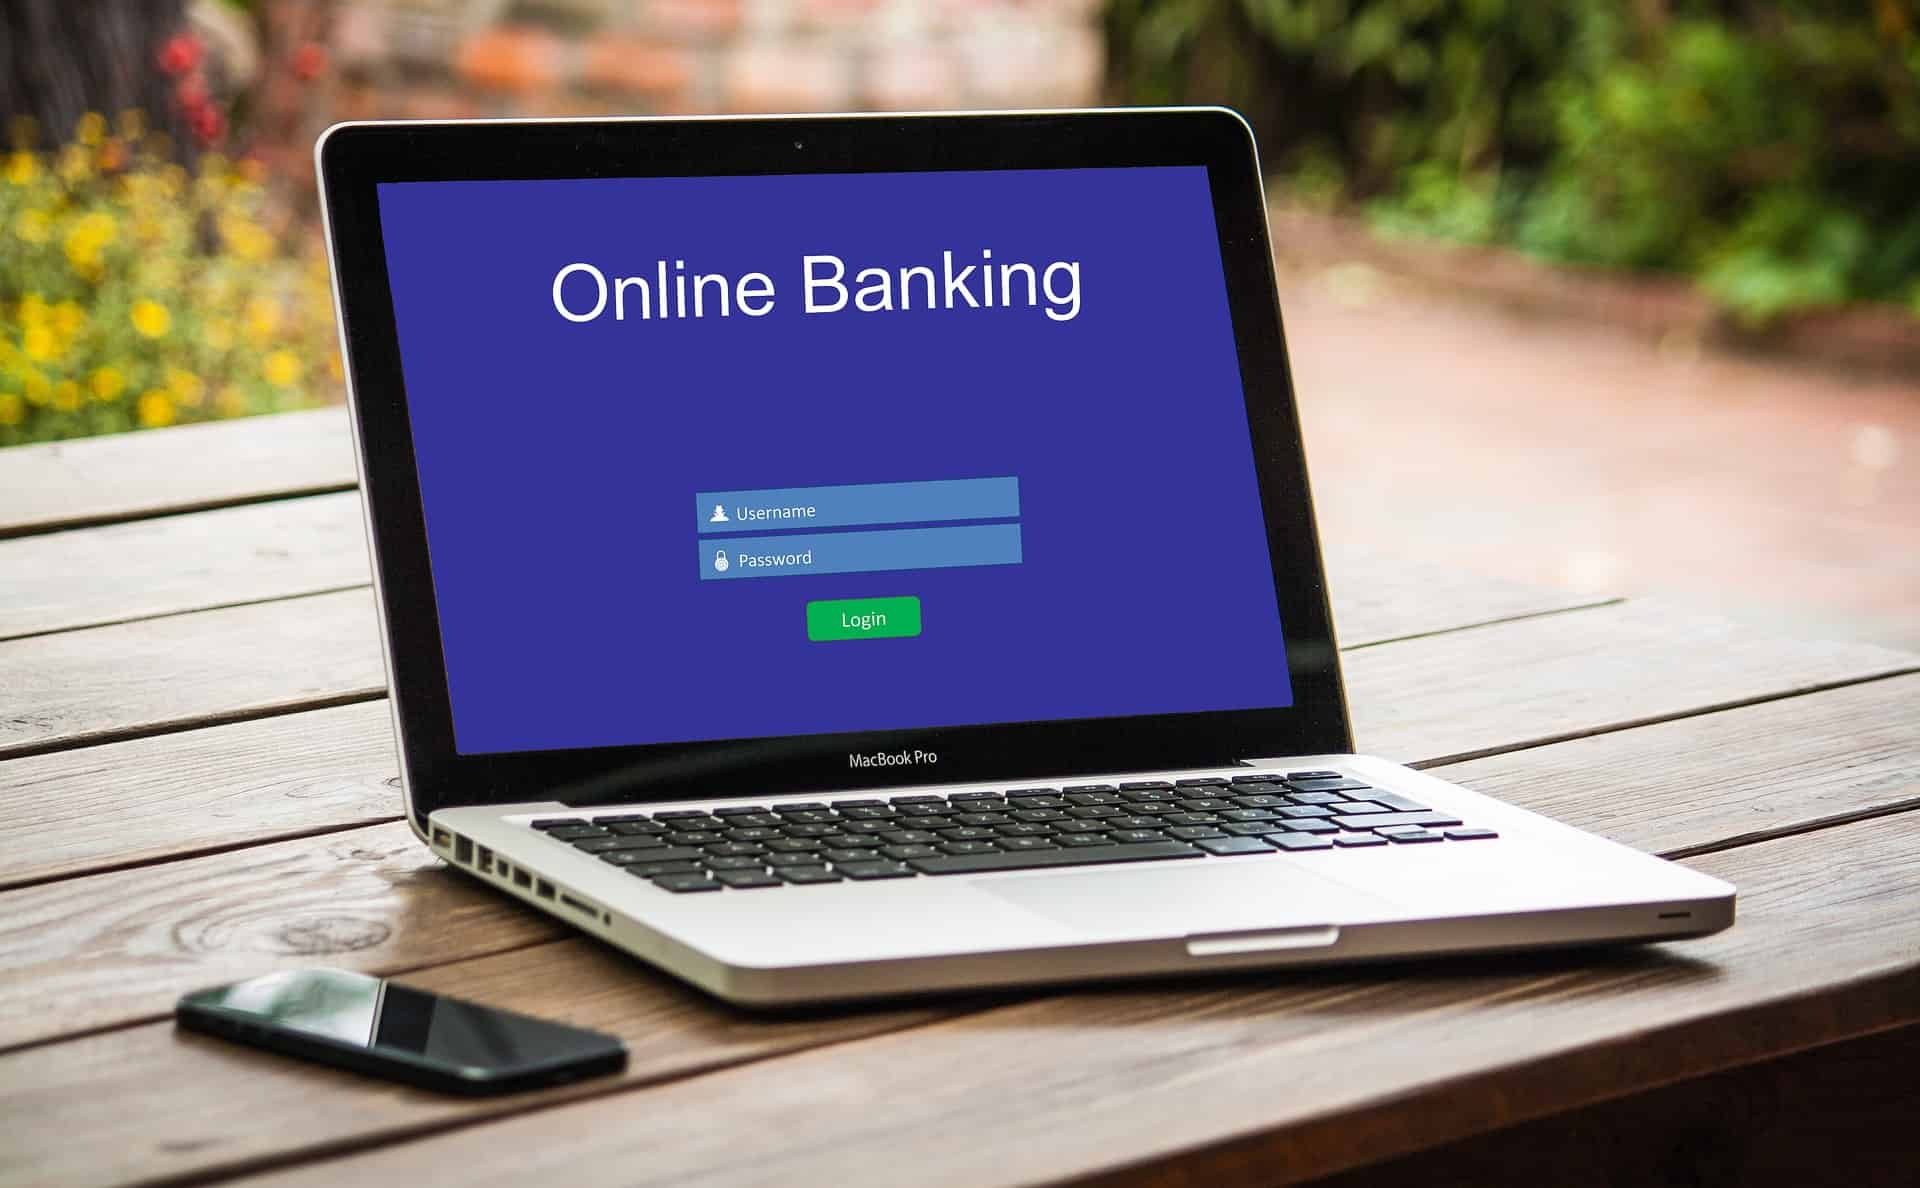 online banking on screen of laptop